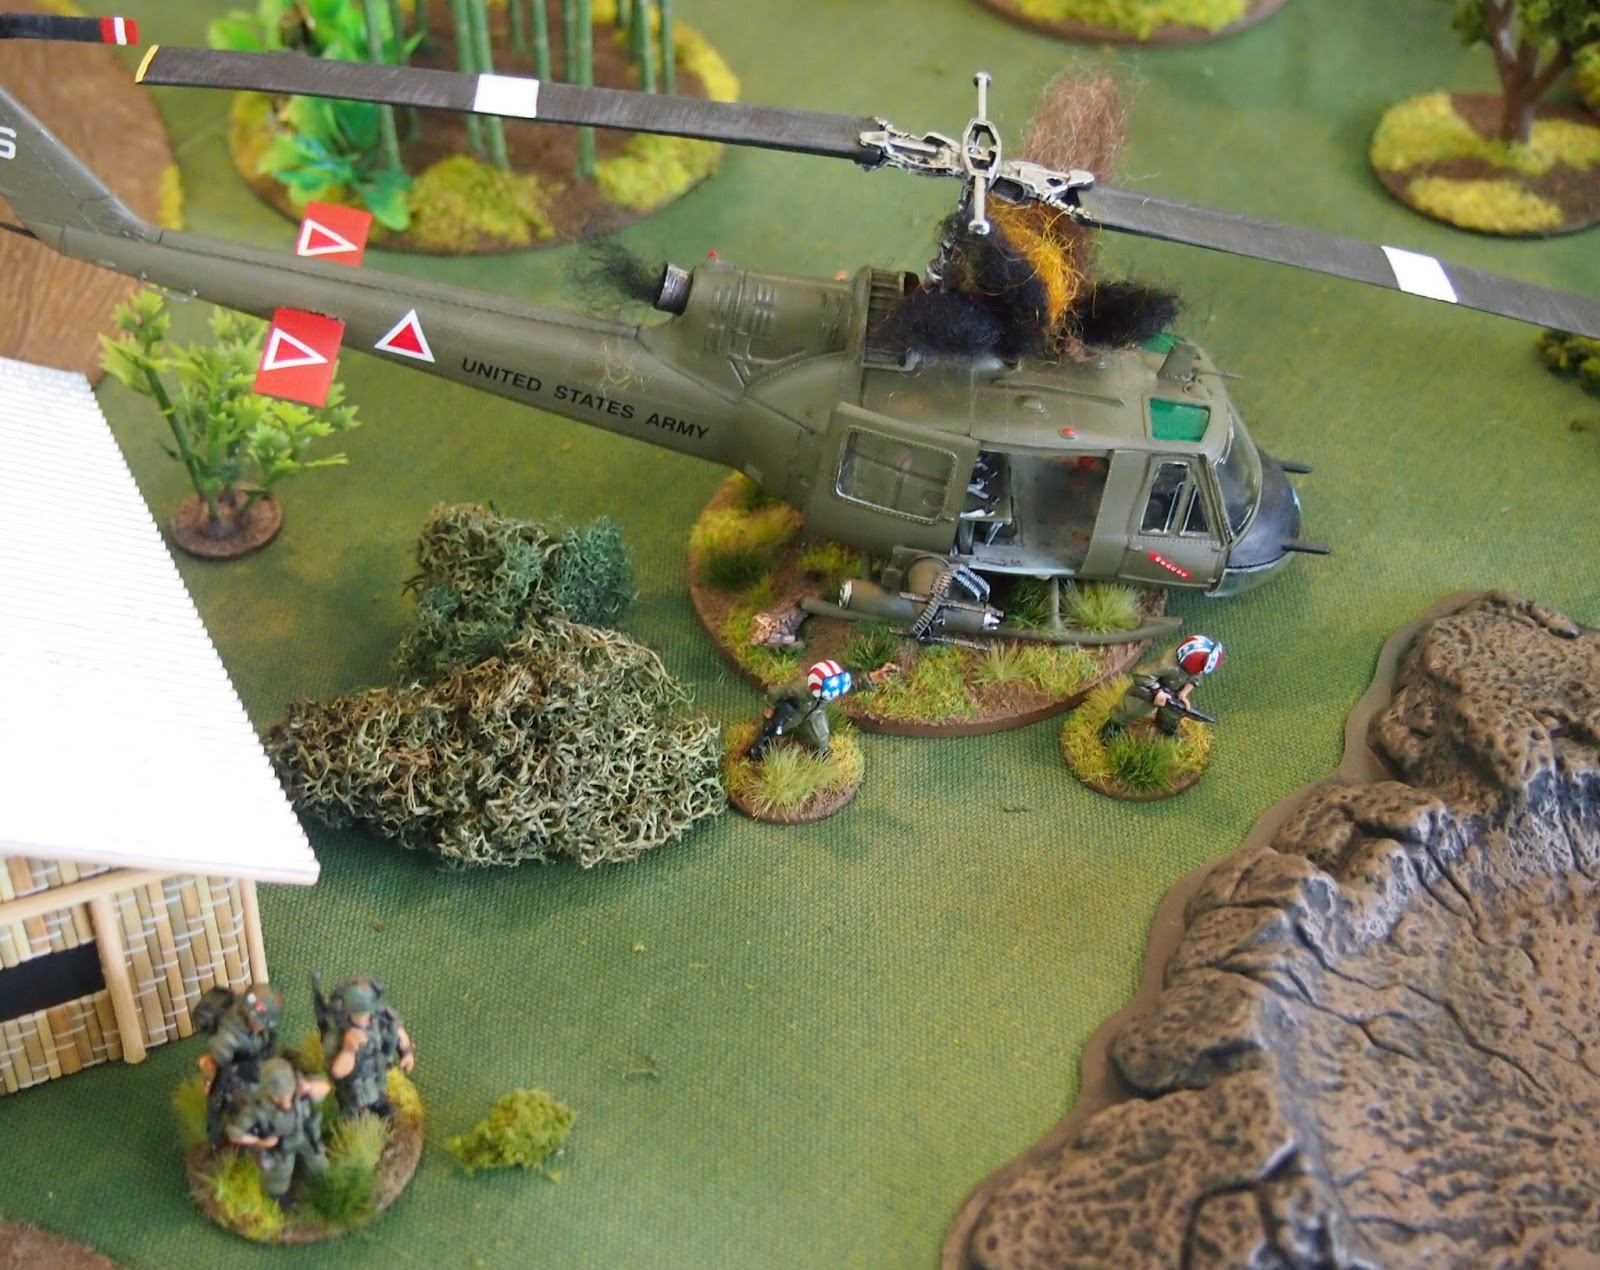 Did I mention that I shot down a Helicopter (finally)?